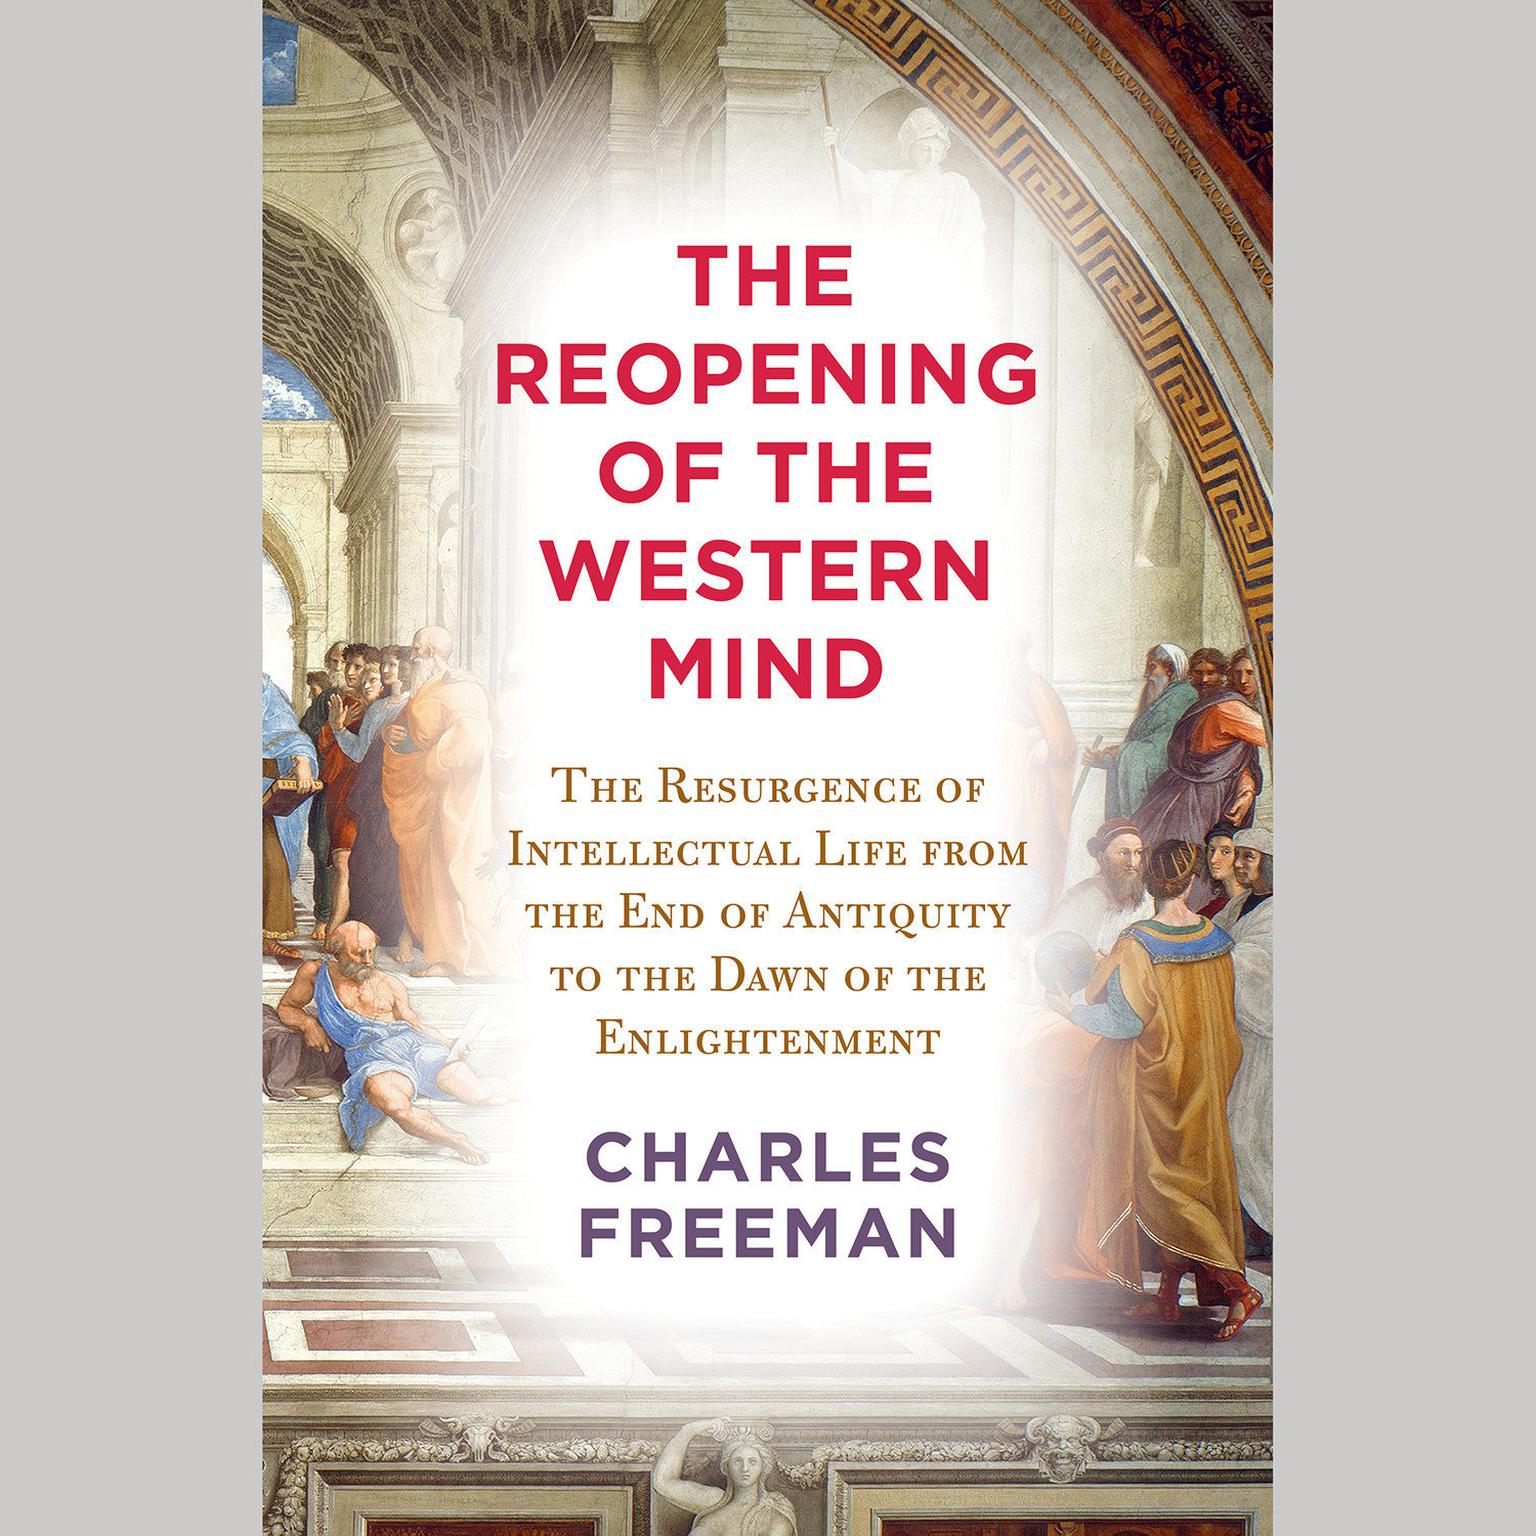 The Reopening of the Western Mind: The Resurgence of Intellectual Life from the End of Antiquity to the Dawn of the Enlightenment Audiobook, by Charles Freeman